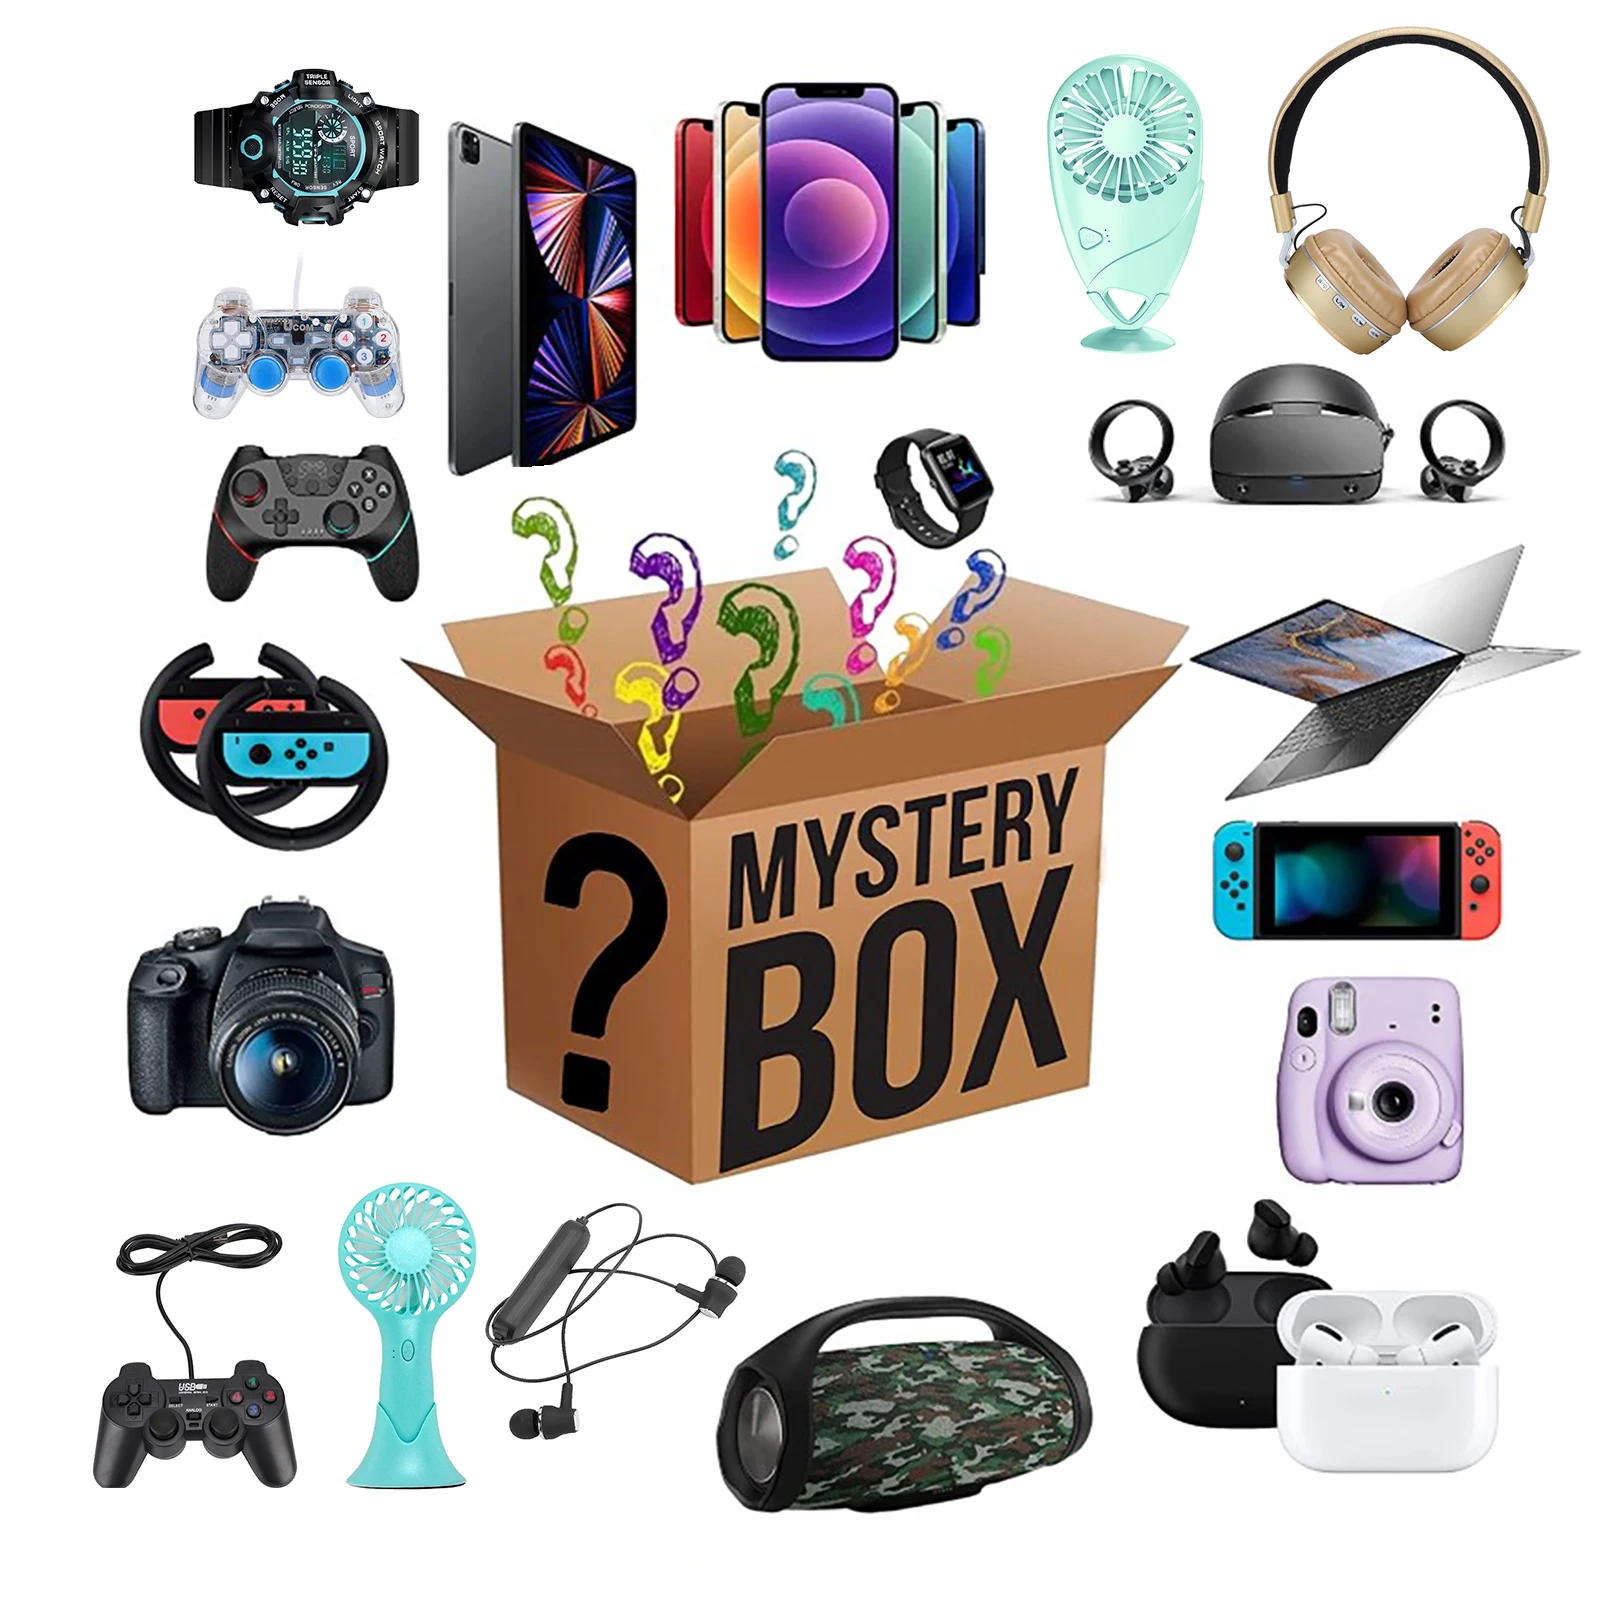 Gamepads Ect Mystery Box Lucky Box Contains Hundreds of Products and Unexpected Gifts Smart Watches Surprise Box There is A Chance to Open: Such As Drones Mystery Box Electronics Random